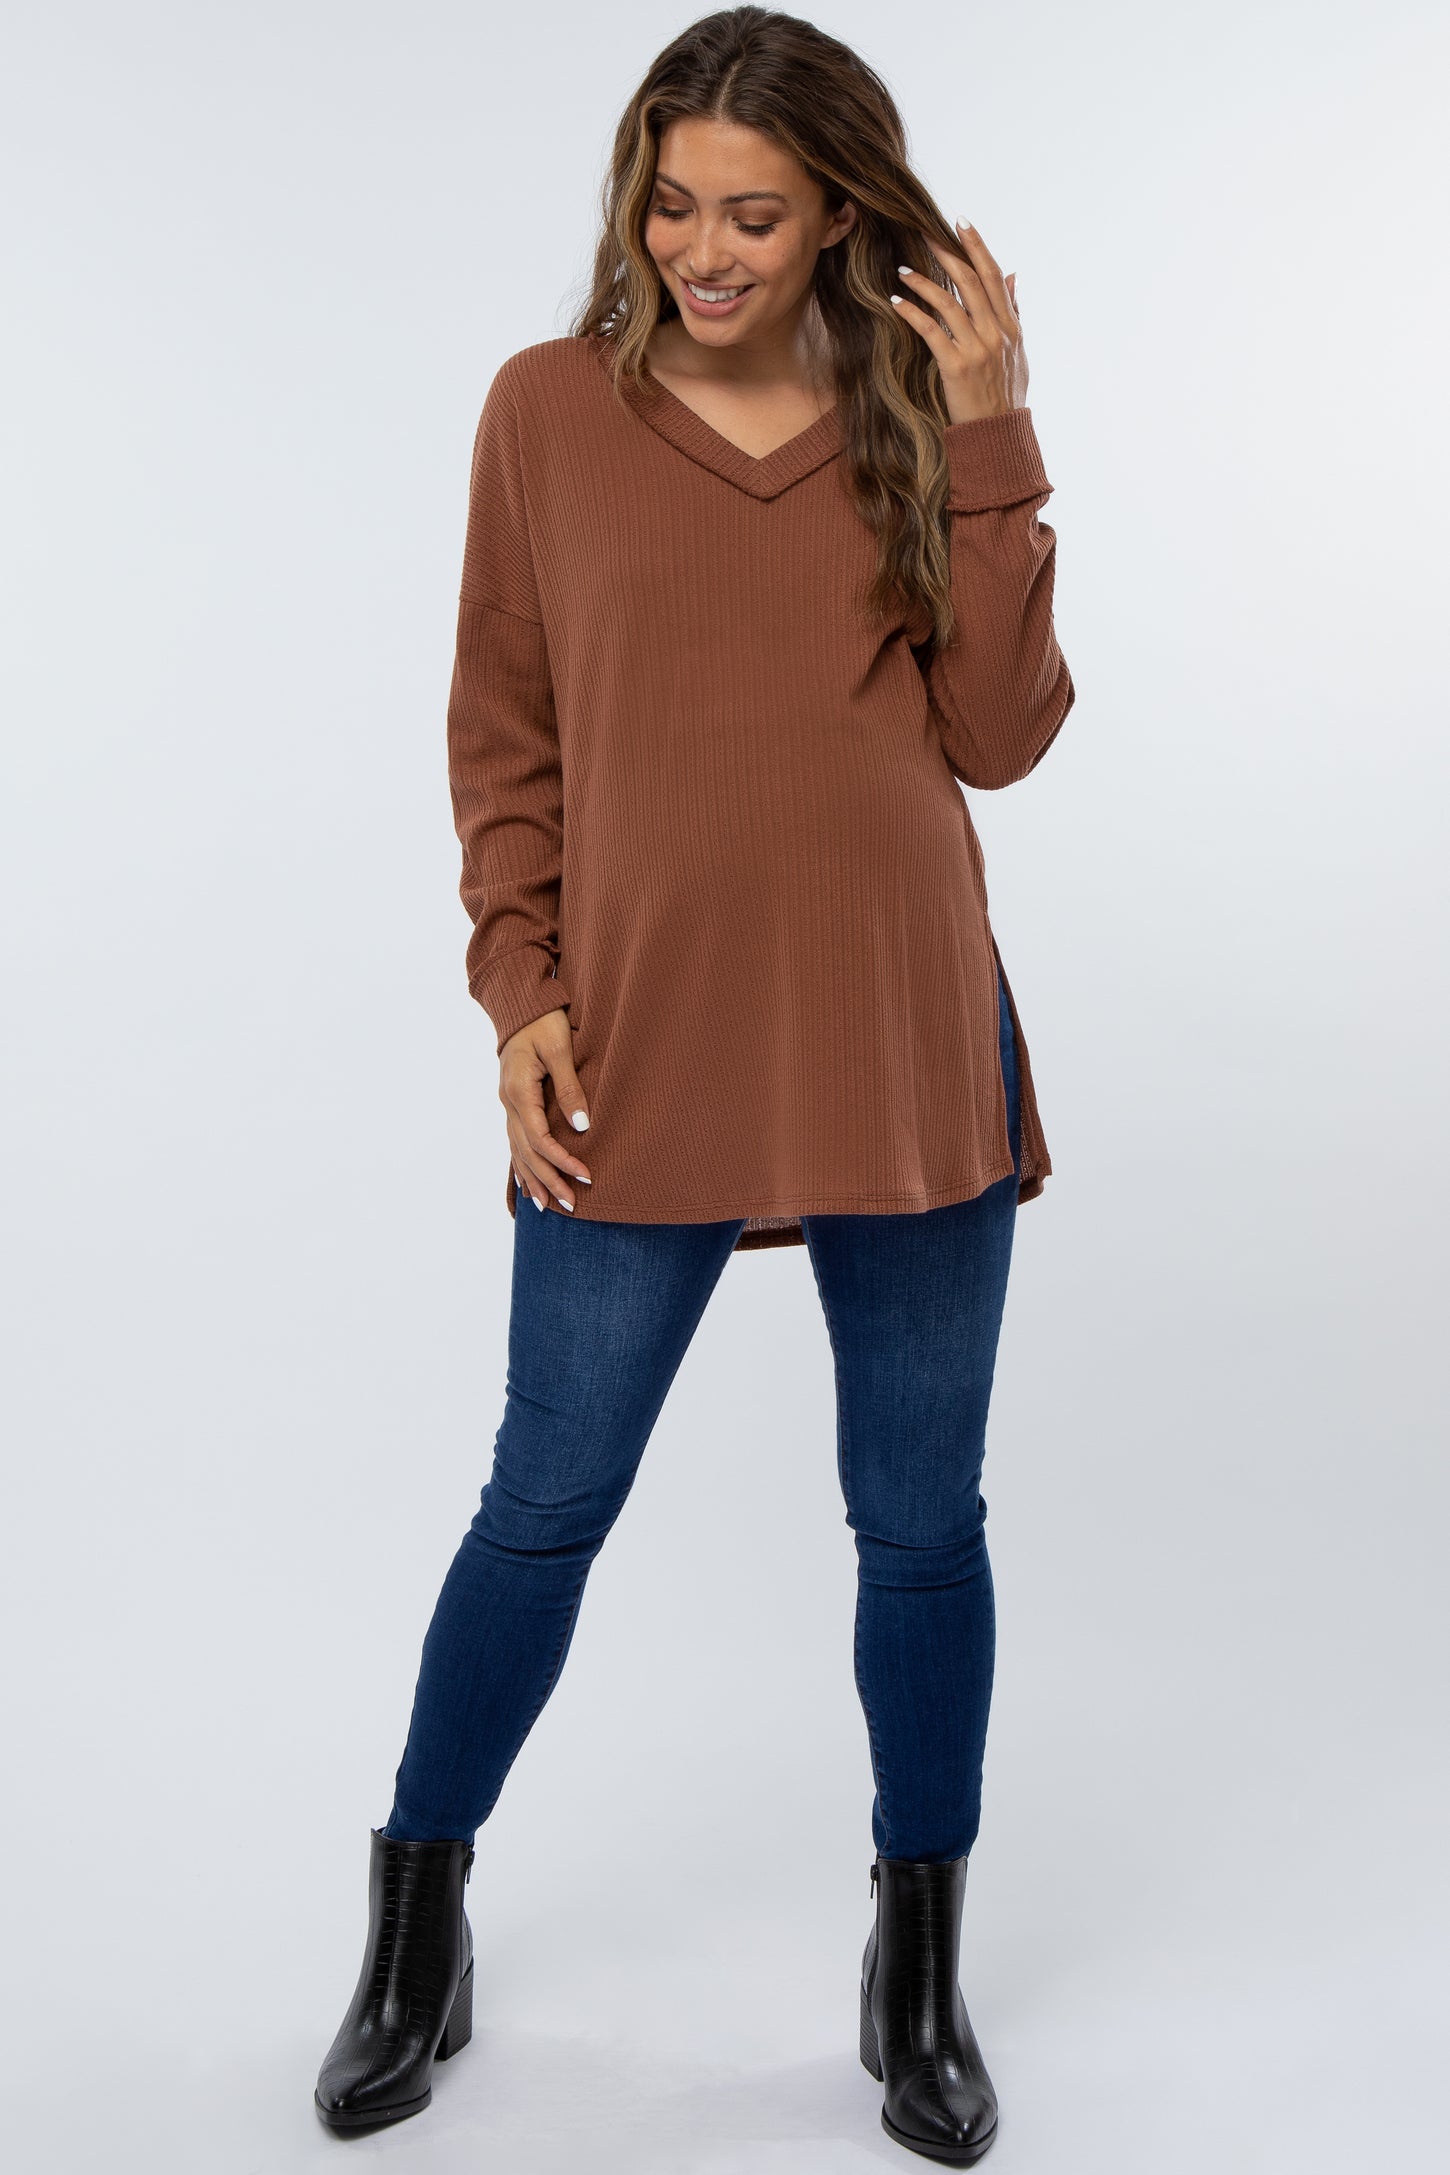 Brown Waffle Knit V-Neck Maternity Top